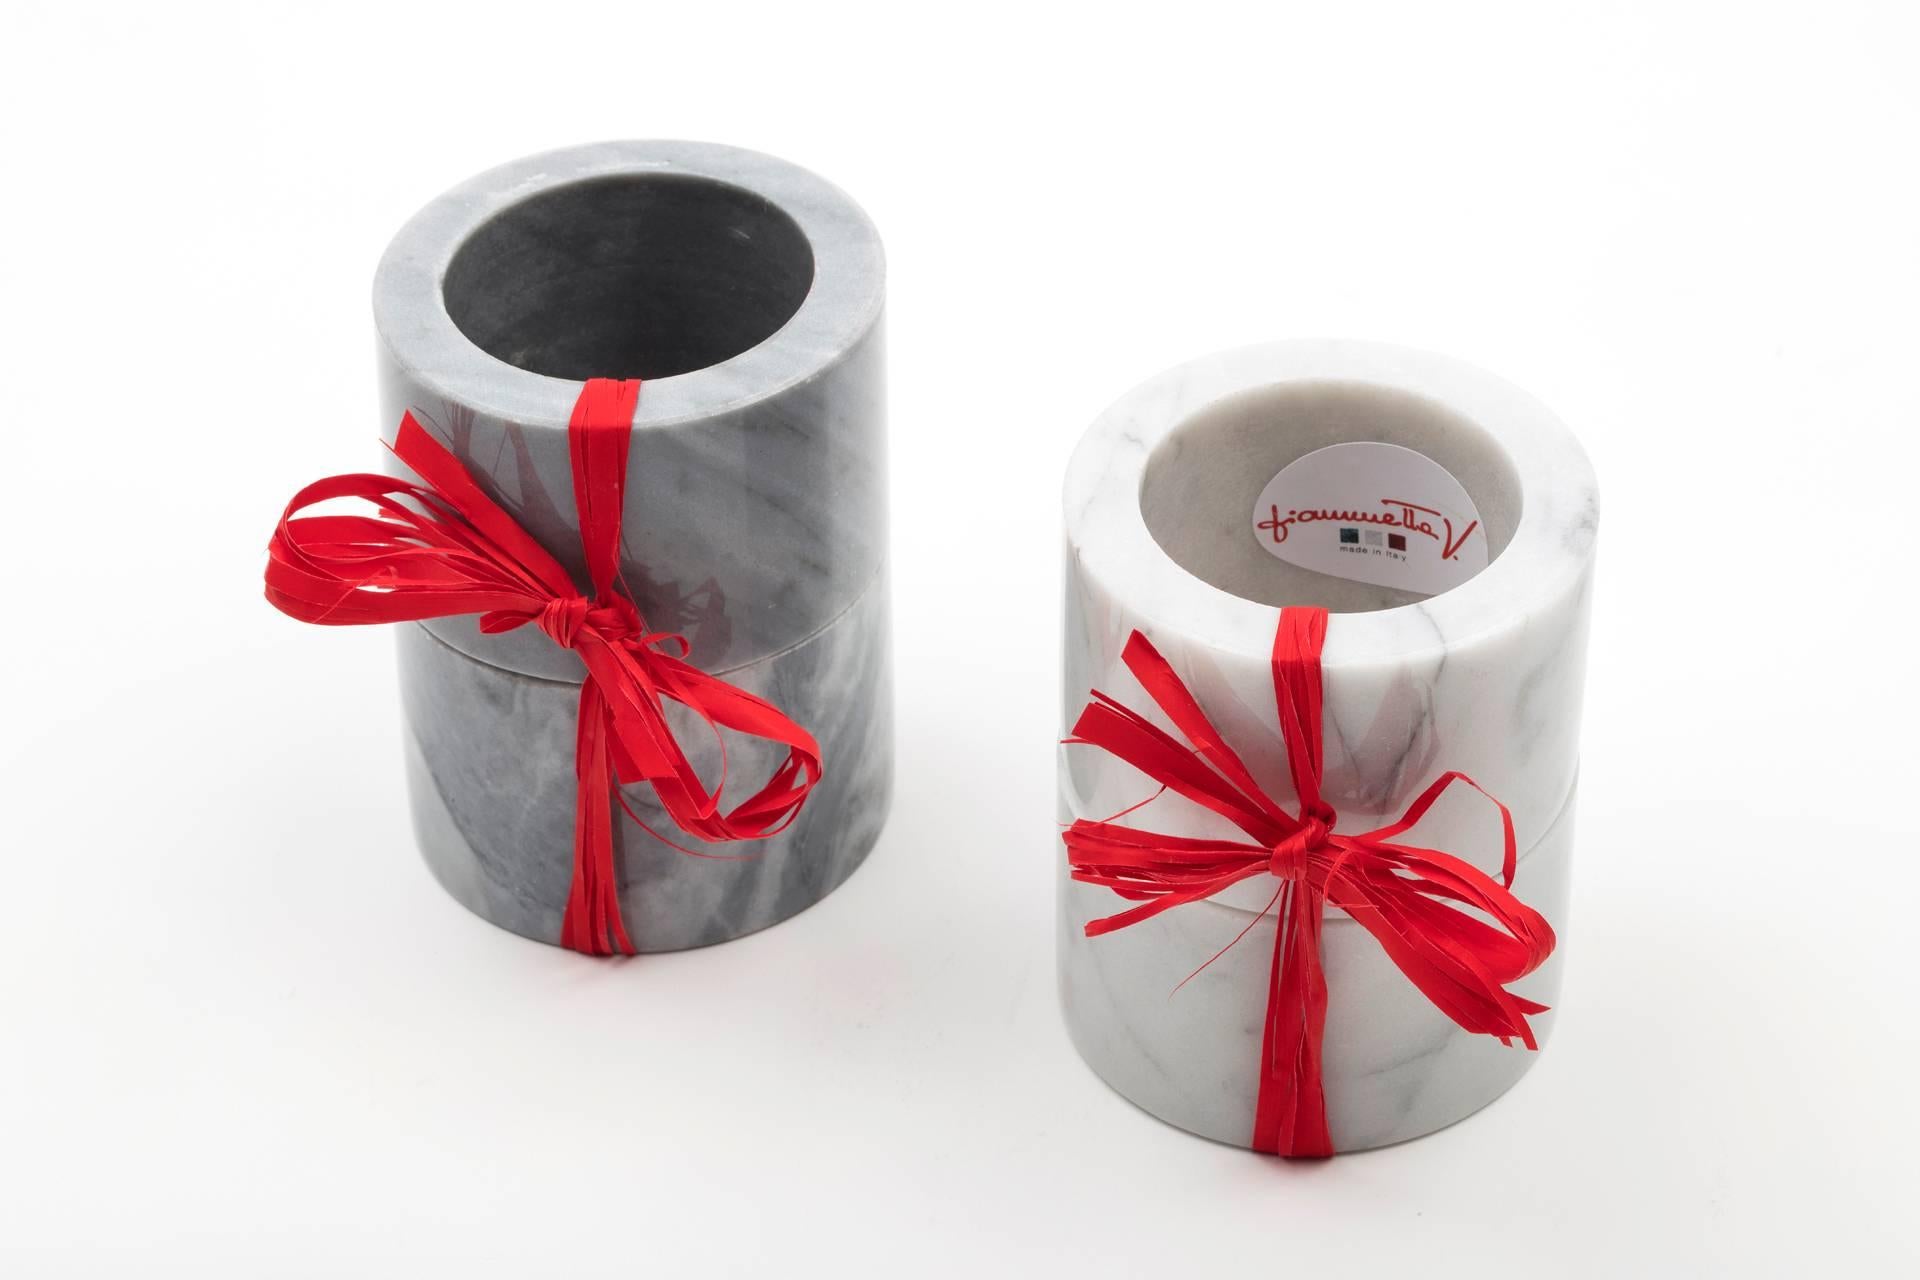 Set of two napkin rings in grey Bardiglio marble with a rounded shape.
Each piece is in a way unique (since each marble block is different in veins and shades) and handcrafted in Italy. Slight variations in shape, color and size are to be considered